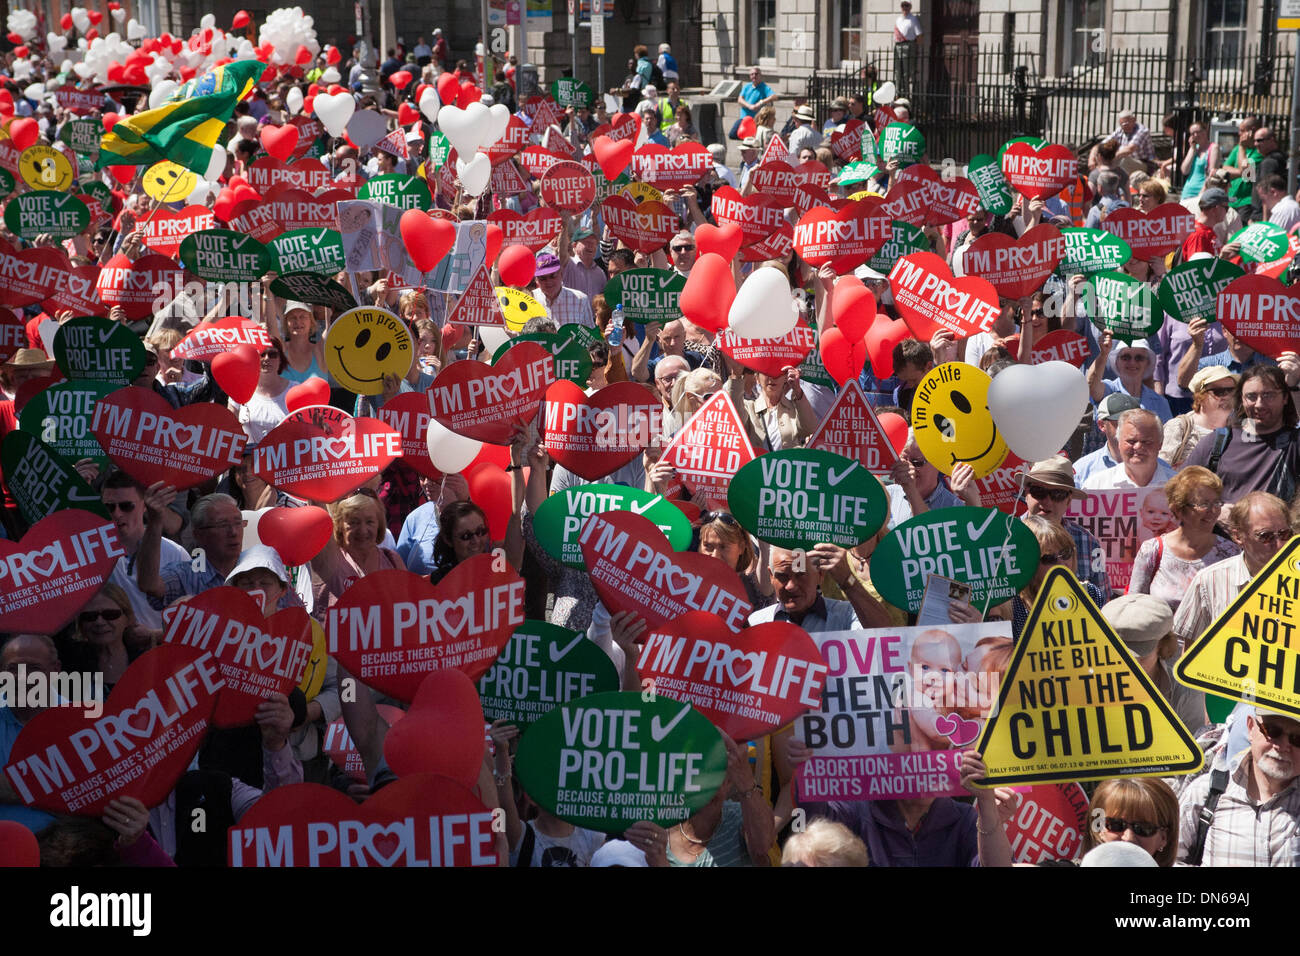 Between 60-100,000 people gather in Dublin for the All Ireland Rally for Life to protest against the new Irish Abortion law. Stock Photo